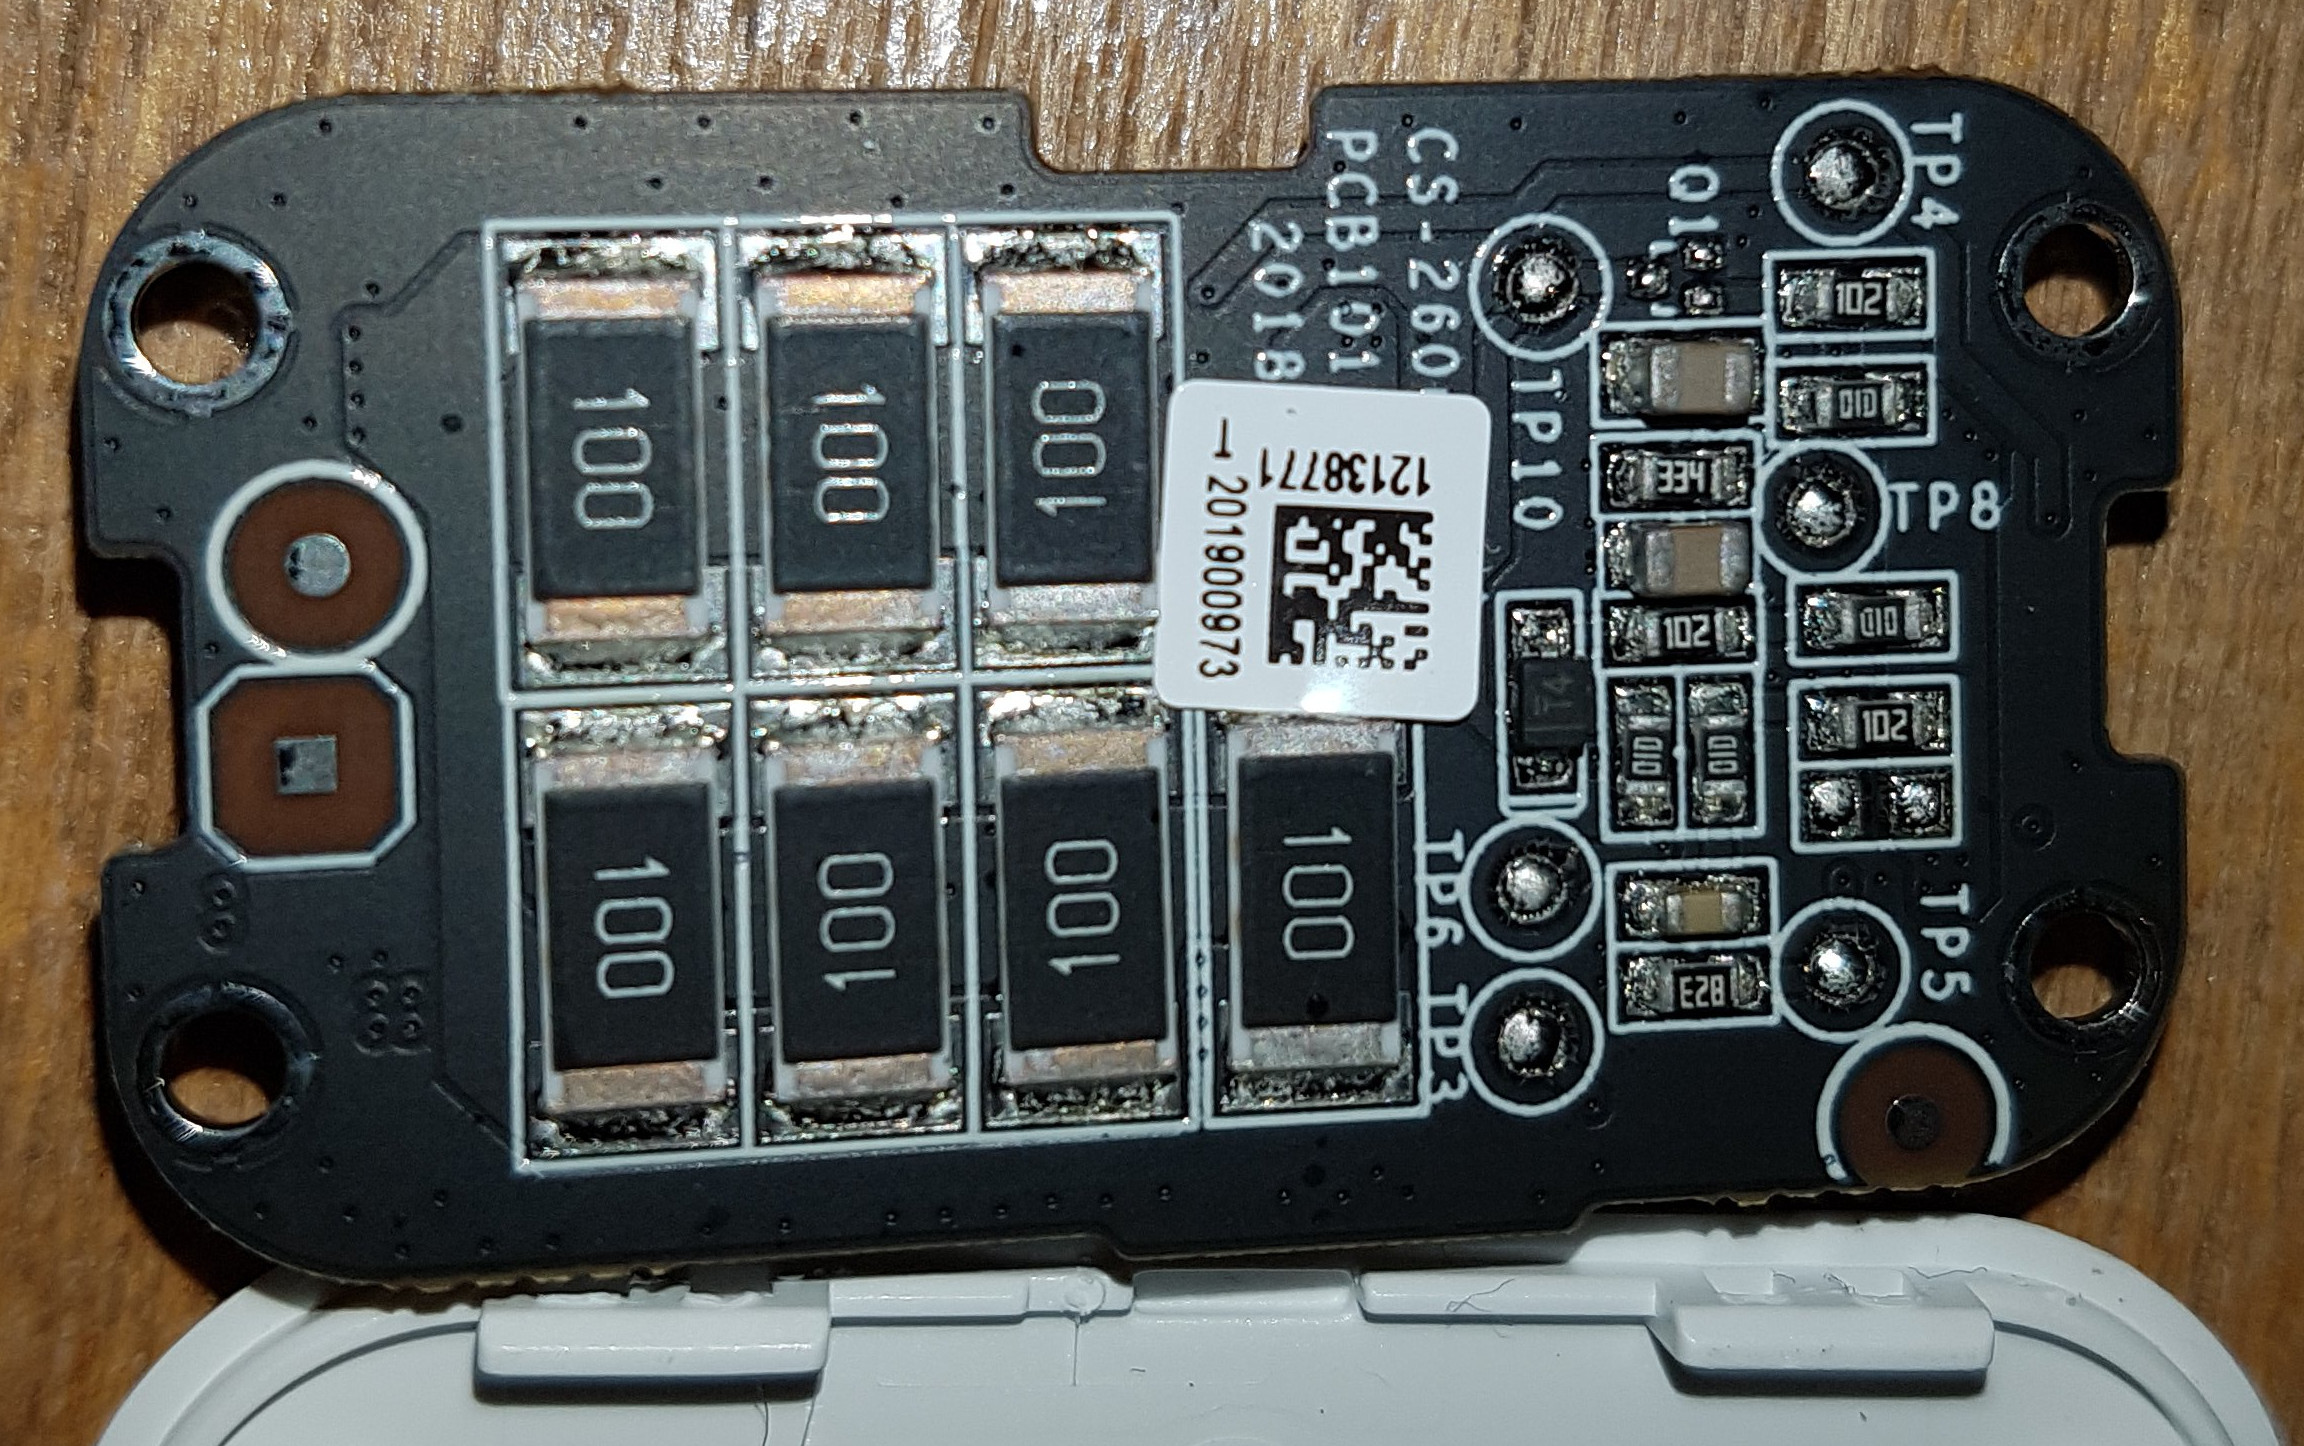 Internals of the DB1 power kit